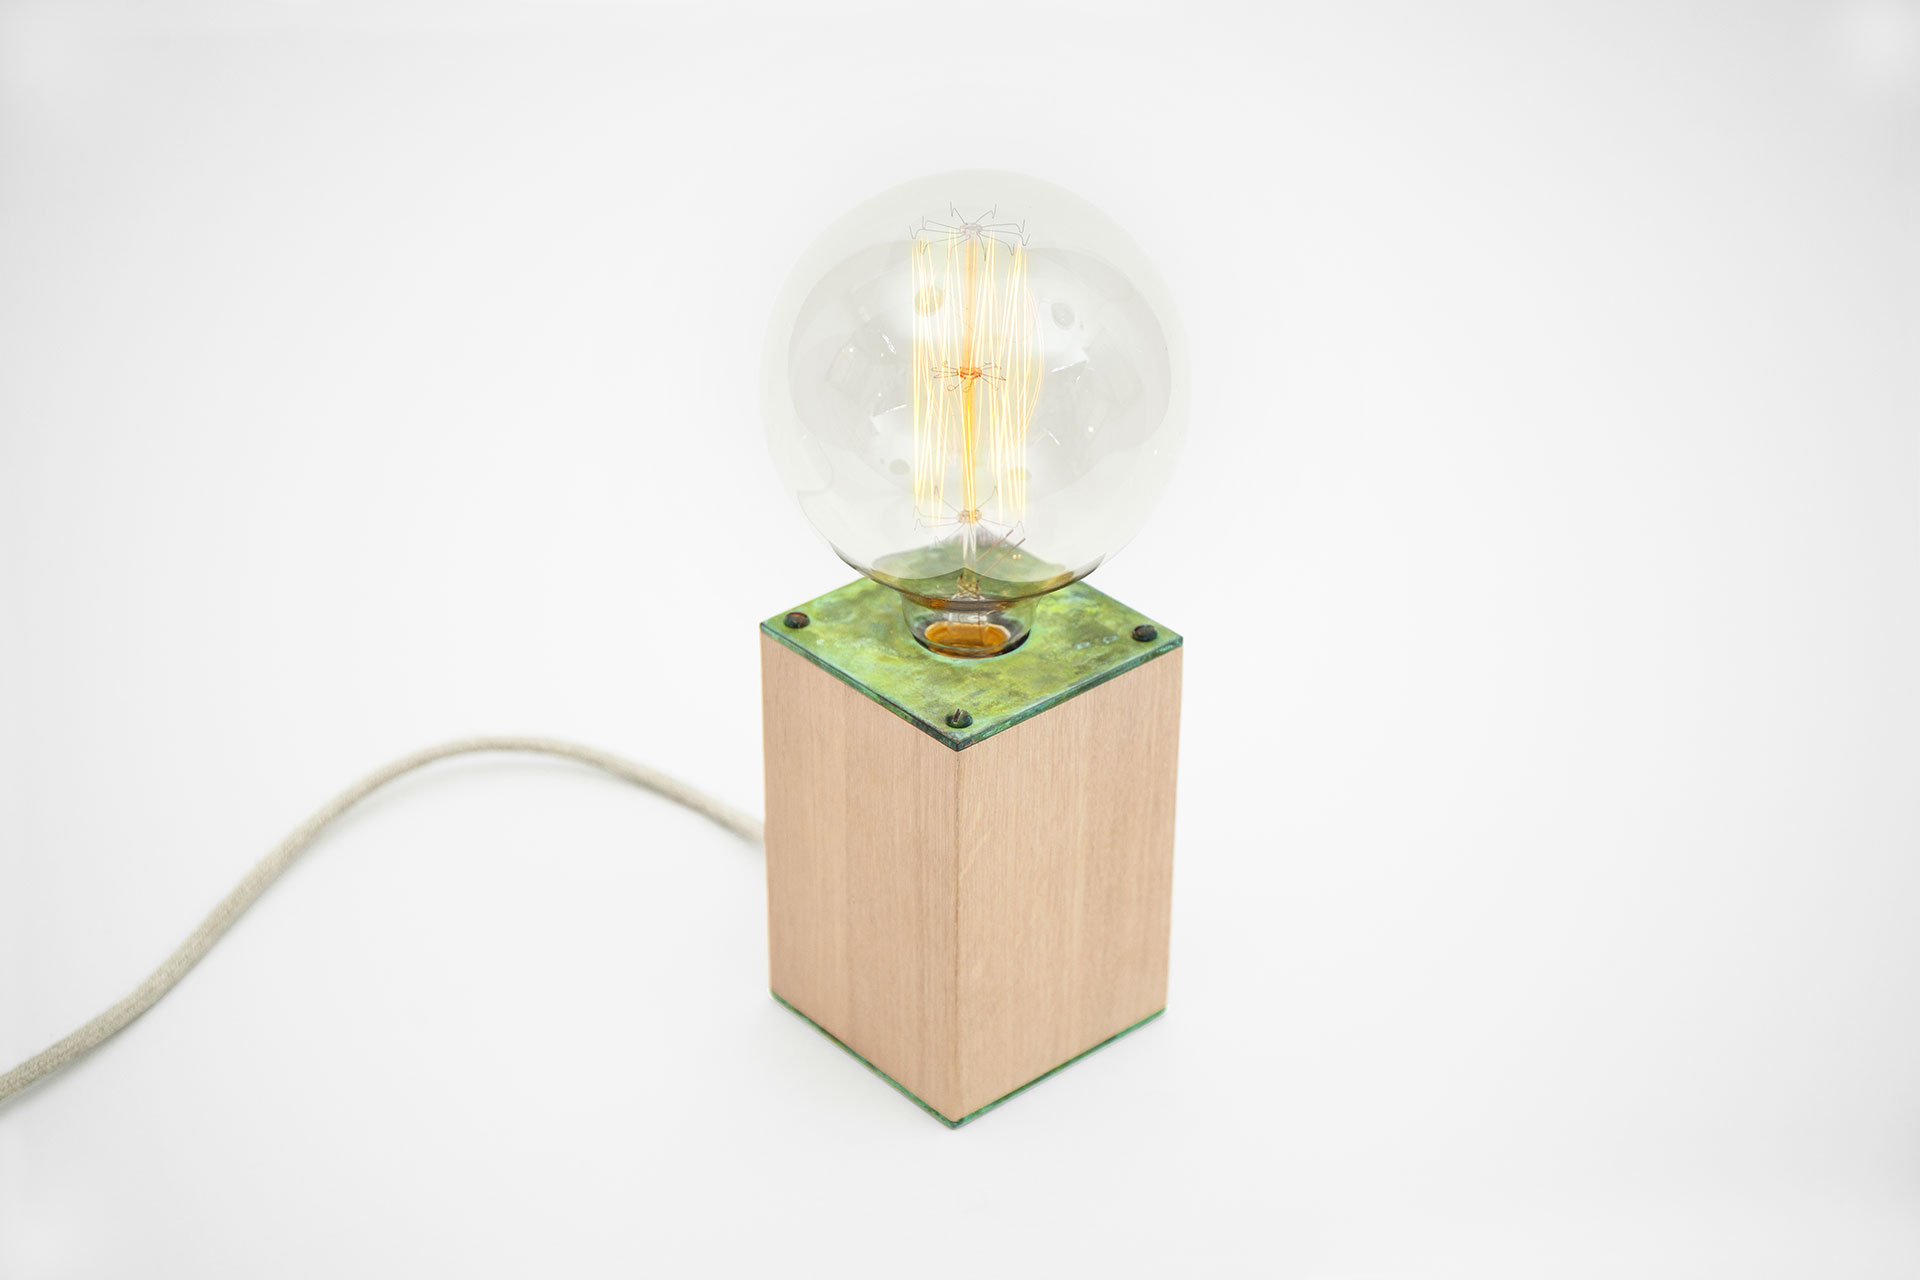 Colorful table lamp in natural oak wood and handmade green patina with magic touch dimmer and large retro bulb